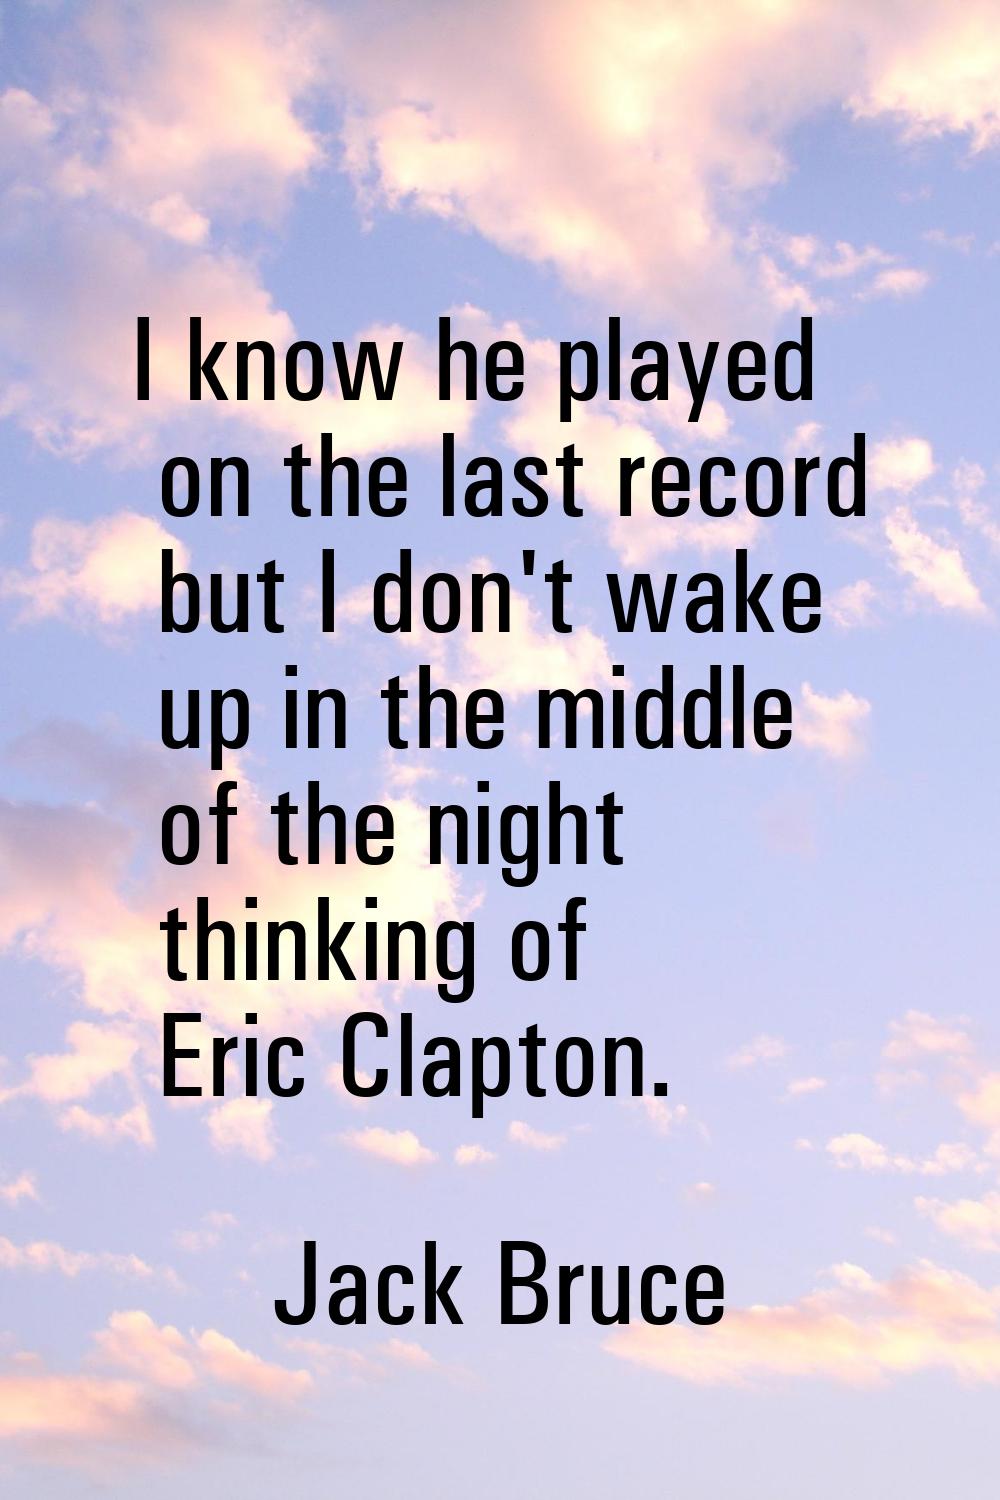 I know he played on the last record but I don't wake up in the middle of the night thinking of Eric